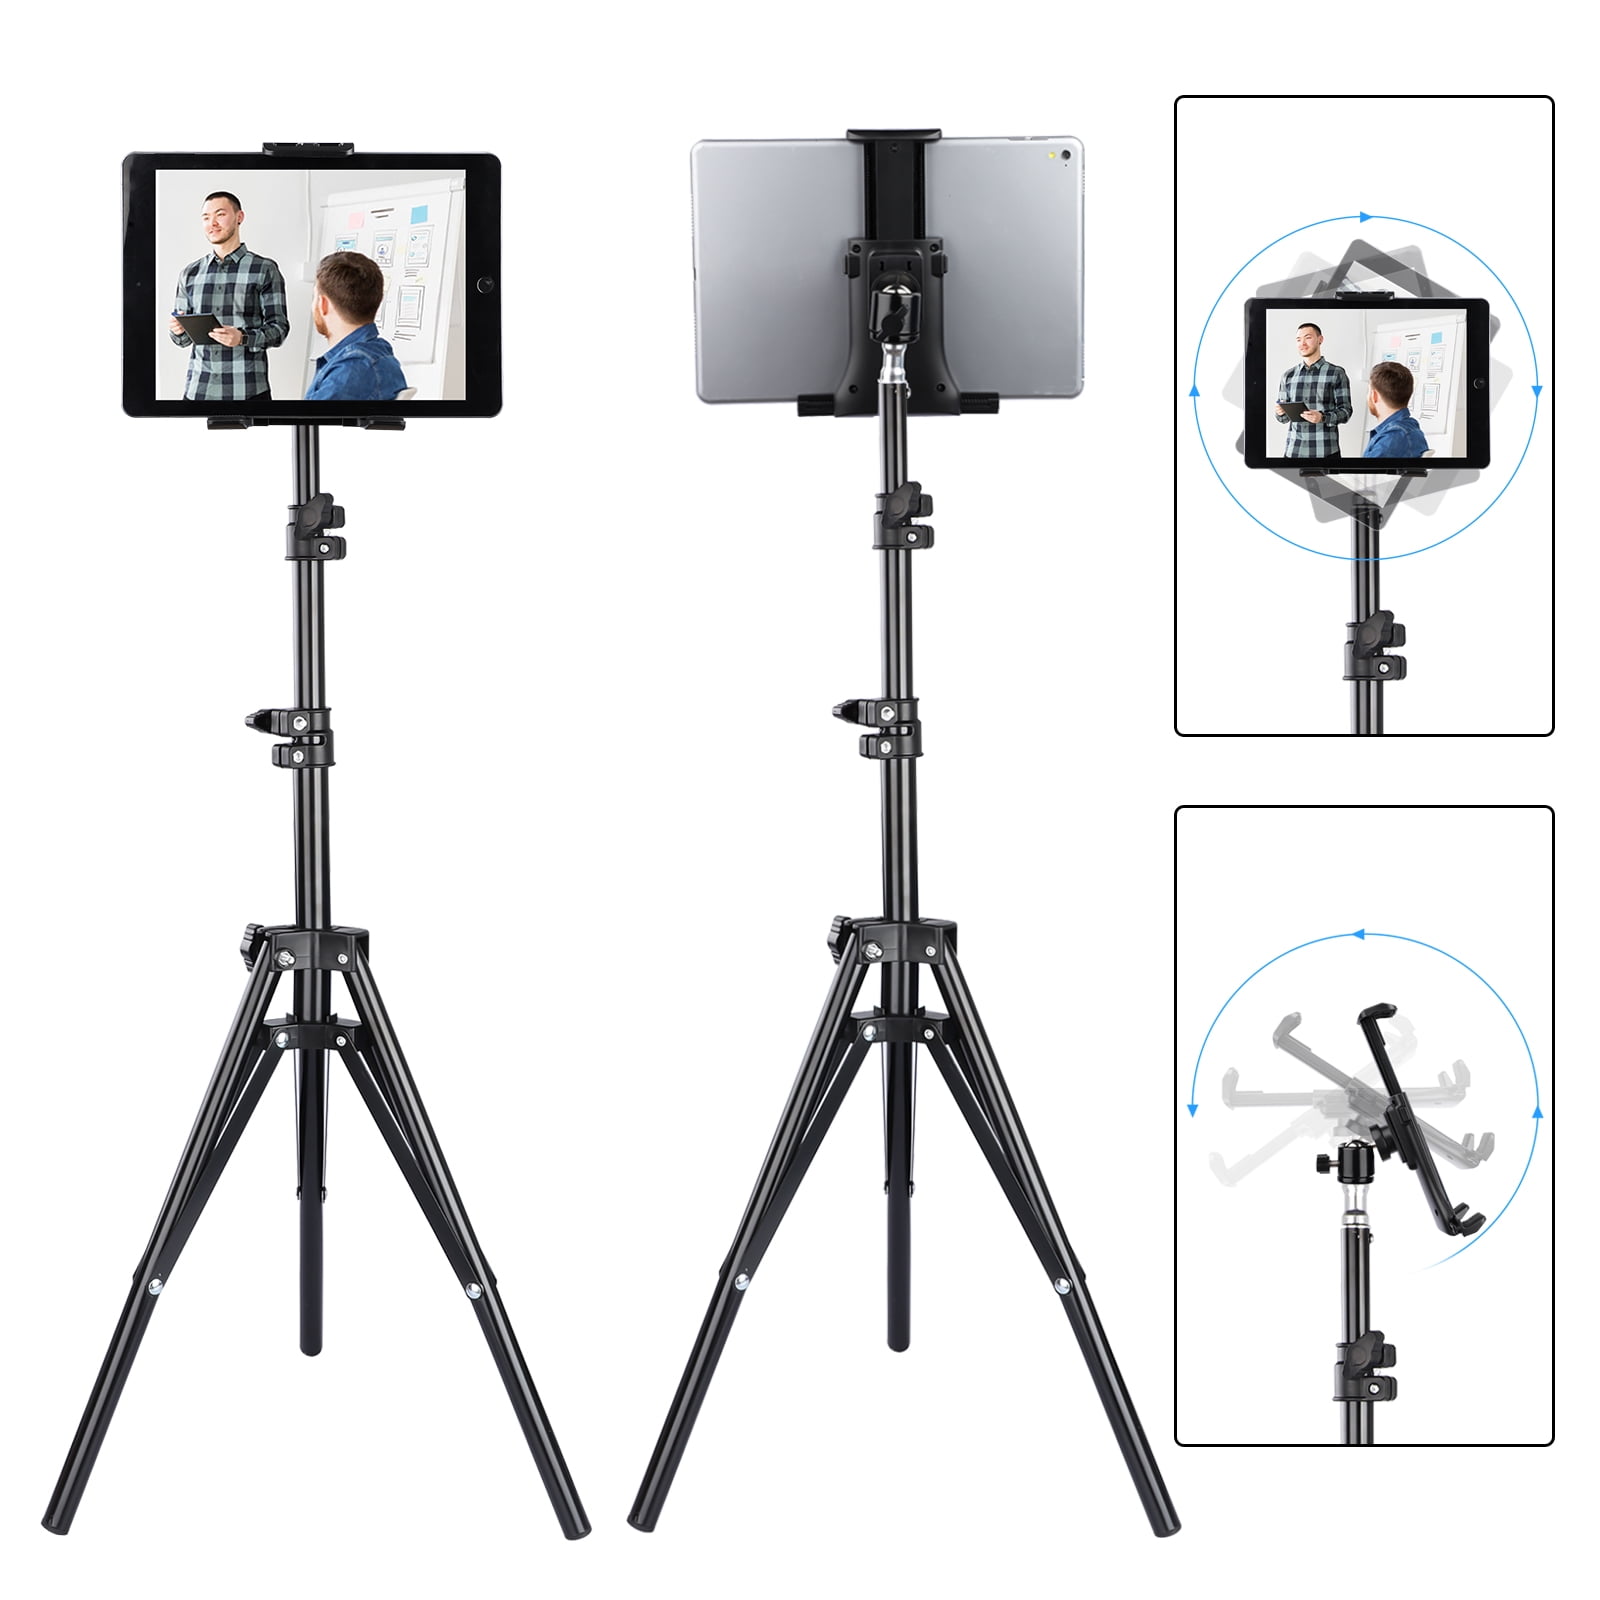 Indoor Outdoor Foldable Bluetooth Control Floor Mount Tablet Stand AkTop iPad Tripod Stand Holder Carrying Case & Phone Holder as Gifts 360 Rotating Height Adjustable for More 7 to 12 Inch Tablets 